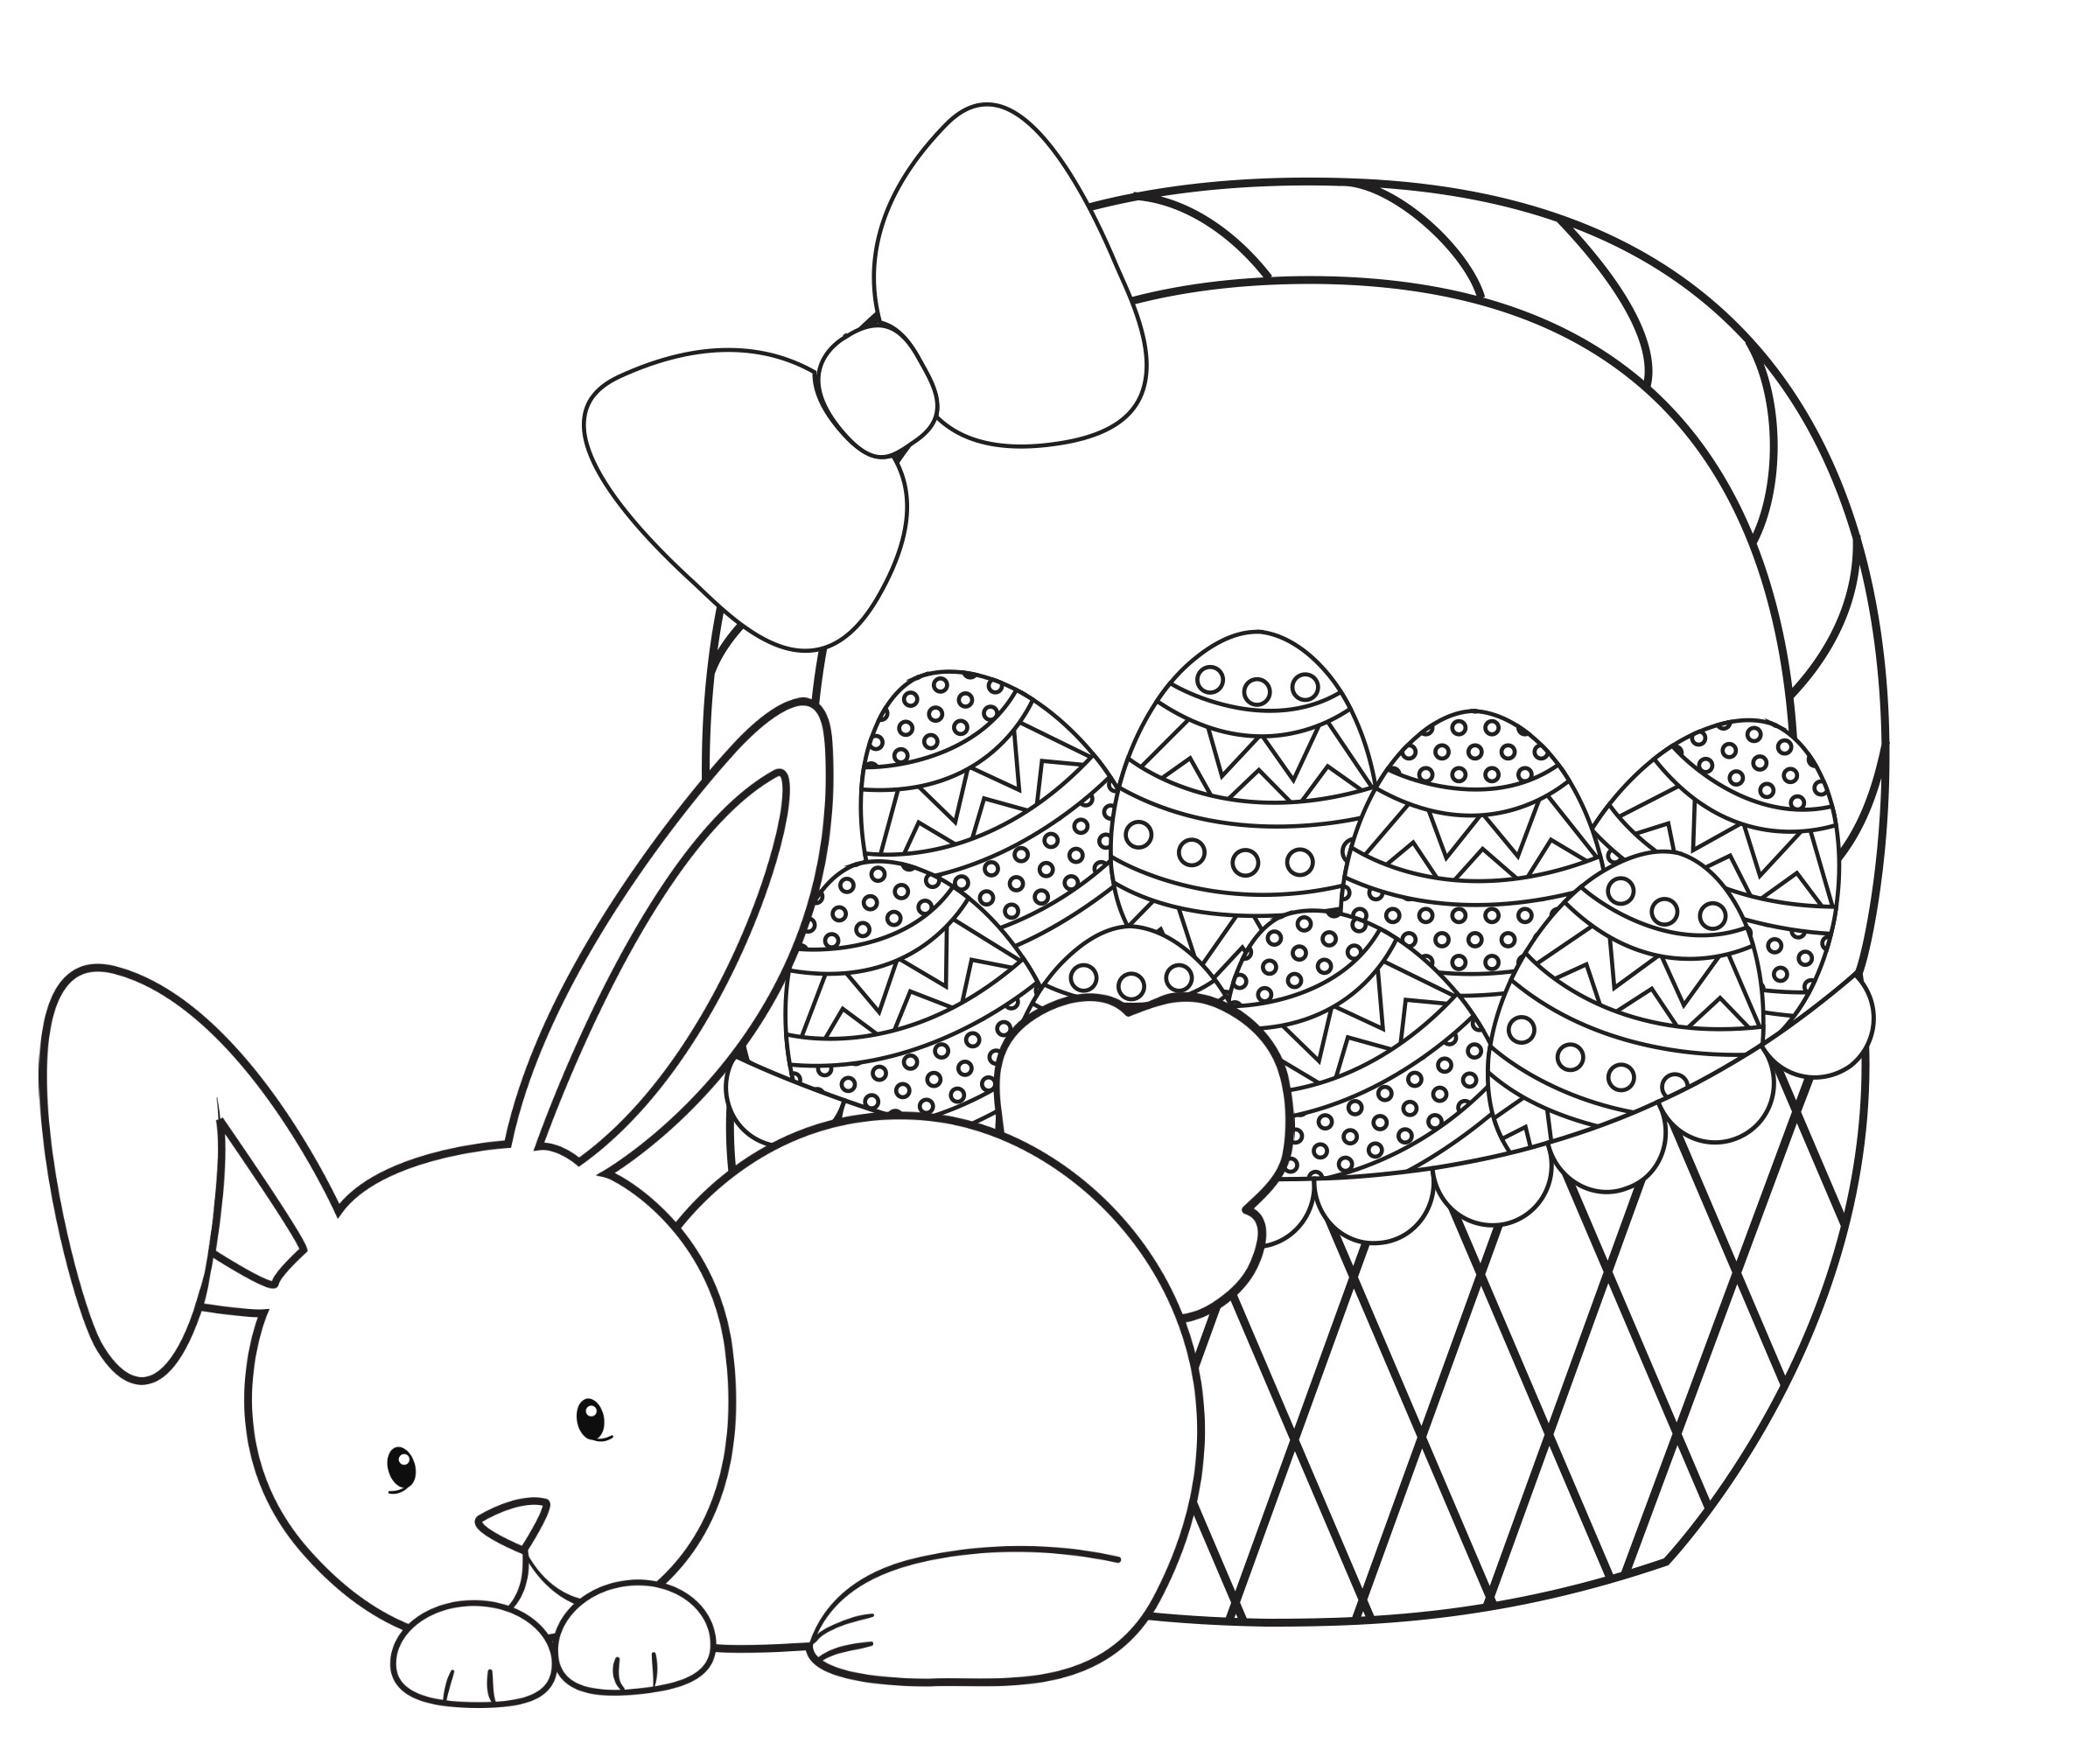 Easter Coloring Pages For Kids - Crazy Little Projects - Coloring Pages Free Printable Easter